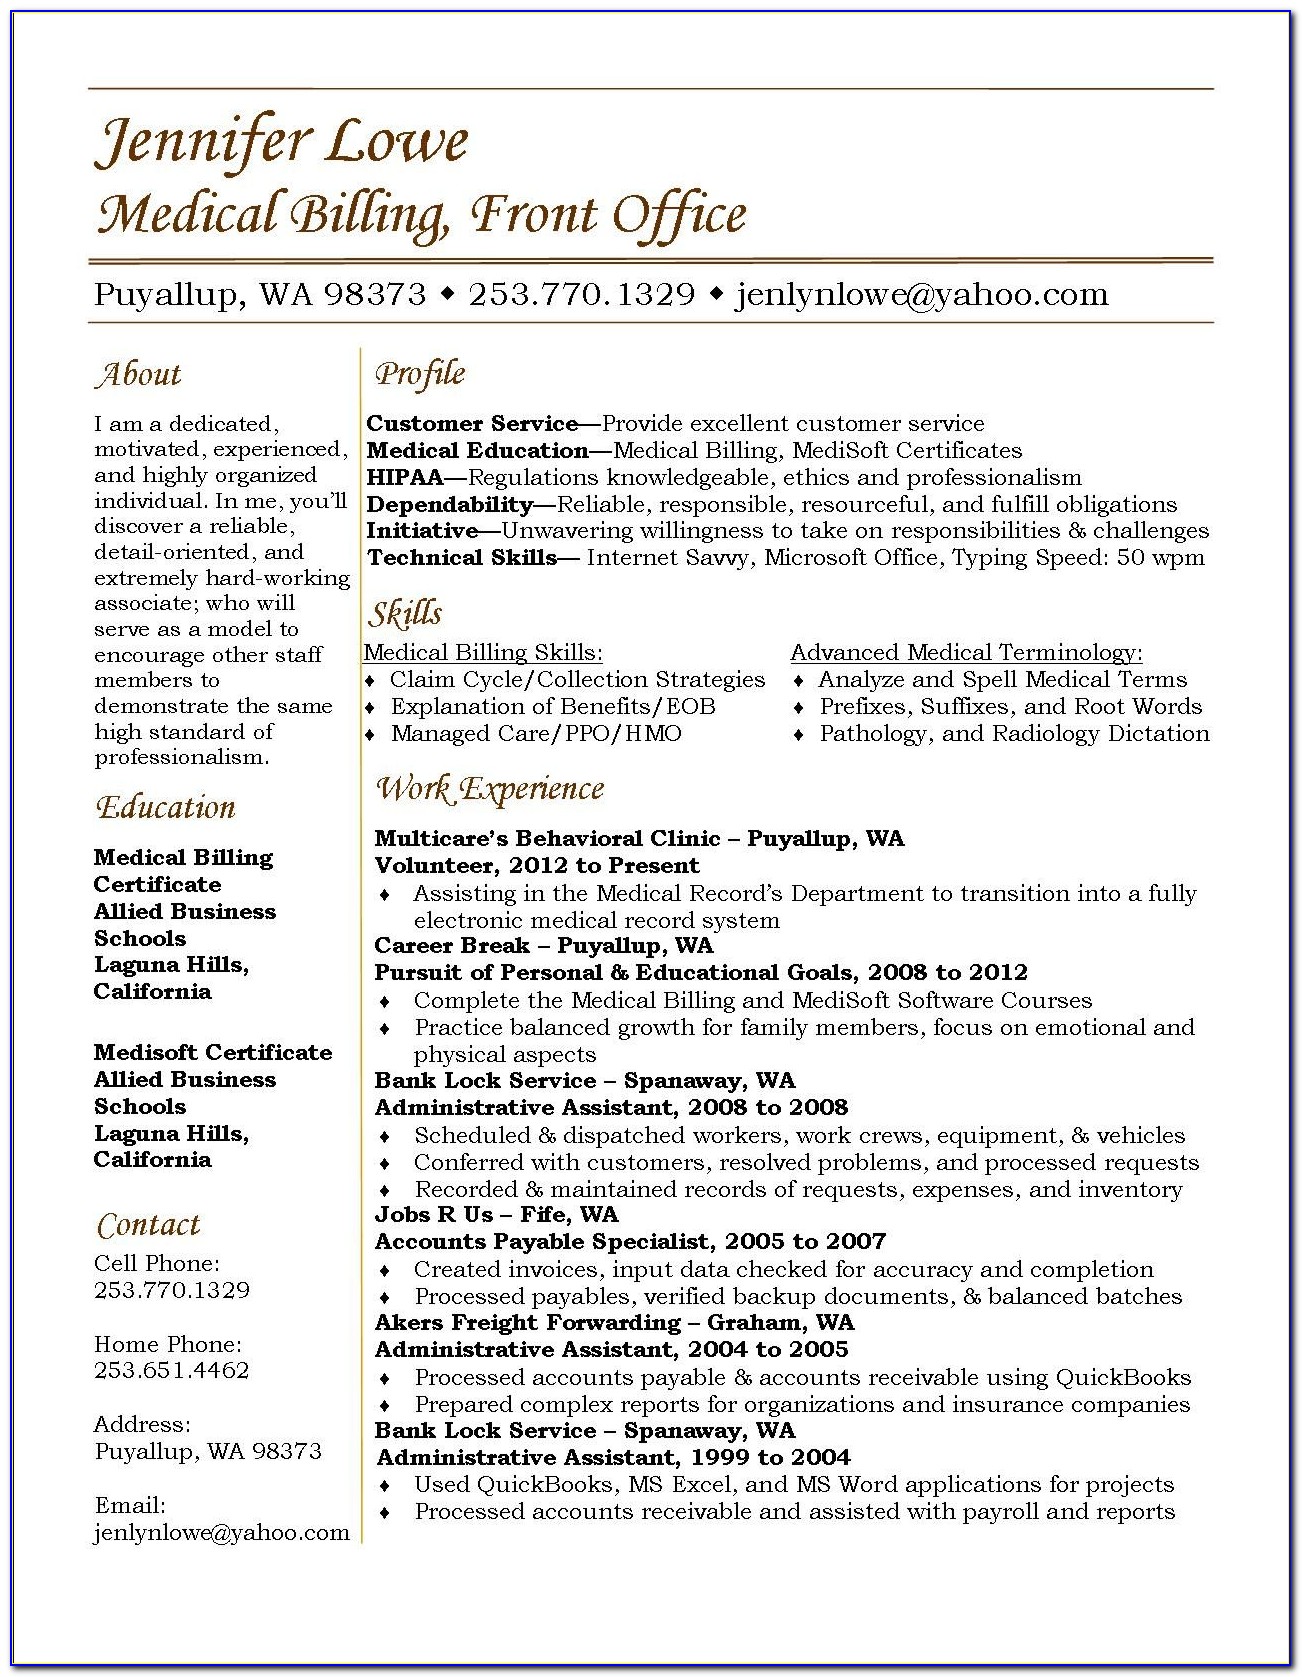 Medical Billing And Coding Resume Qualifications